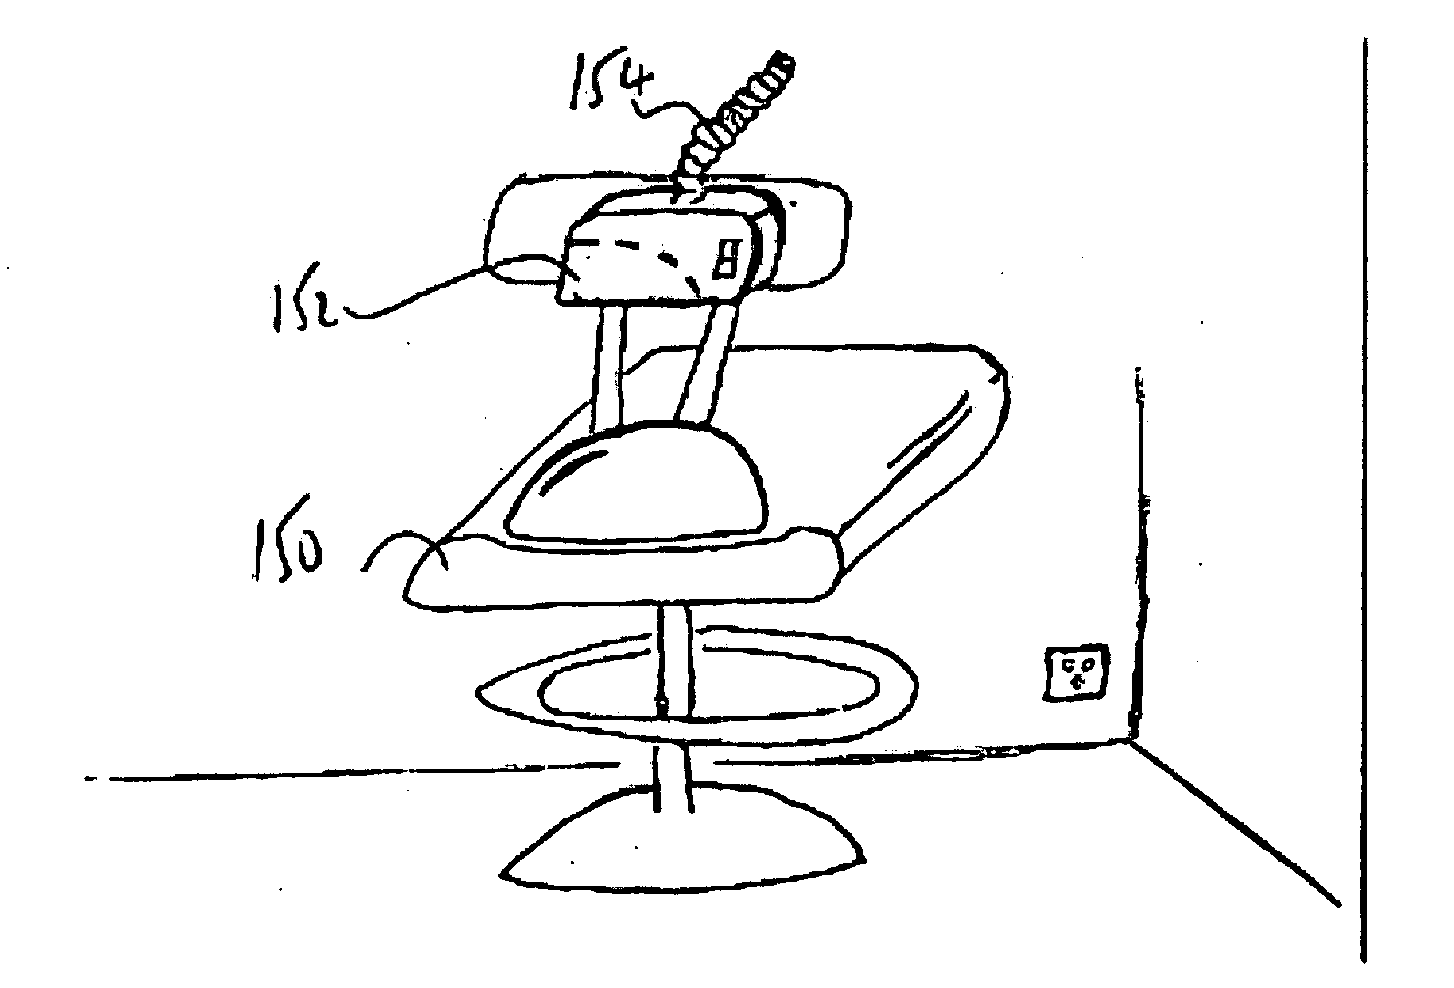 Method and Device to Collect Hair Cuttings